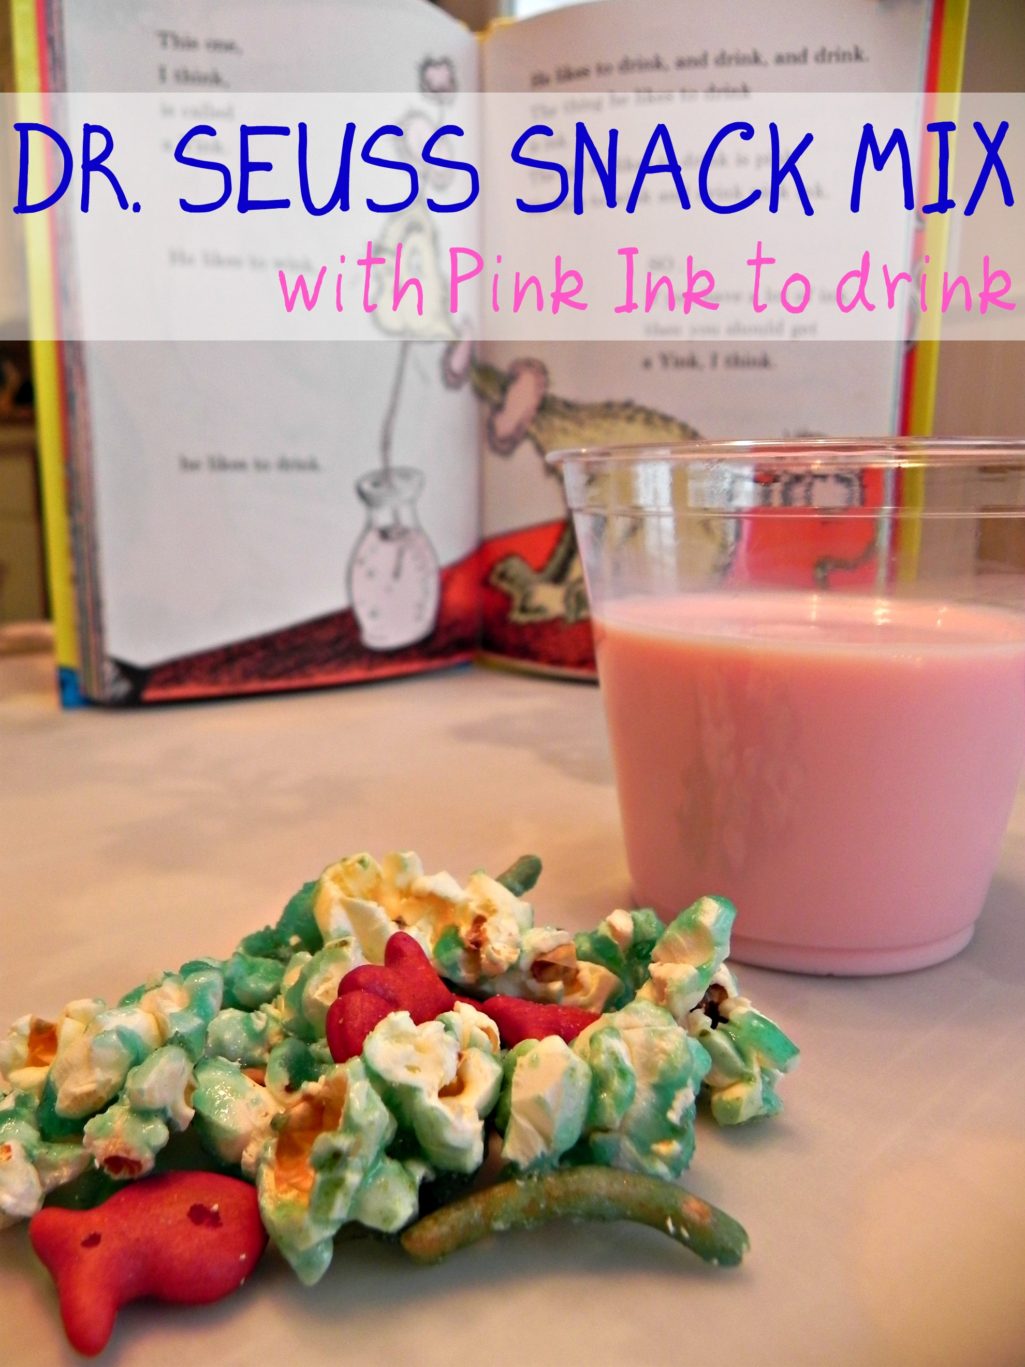 Dr. Seuss Snack Mix and Pink Ink